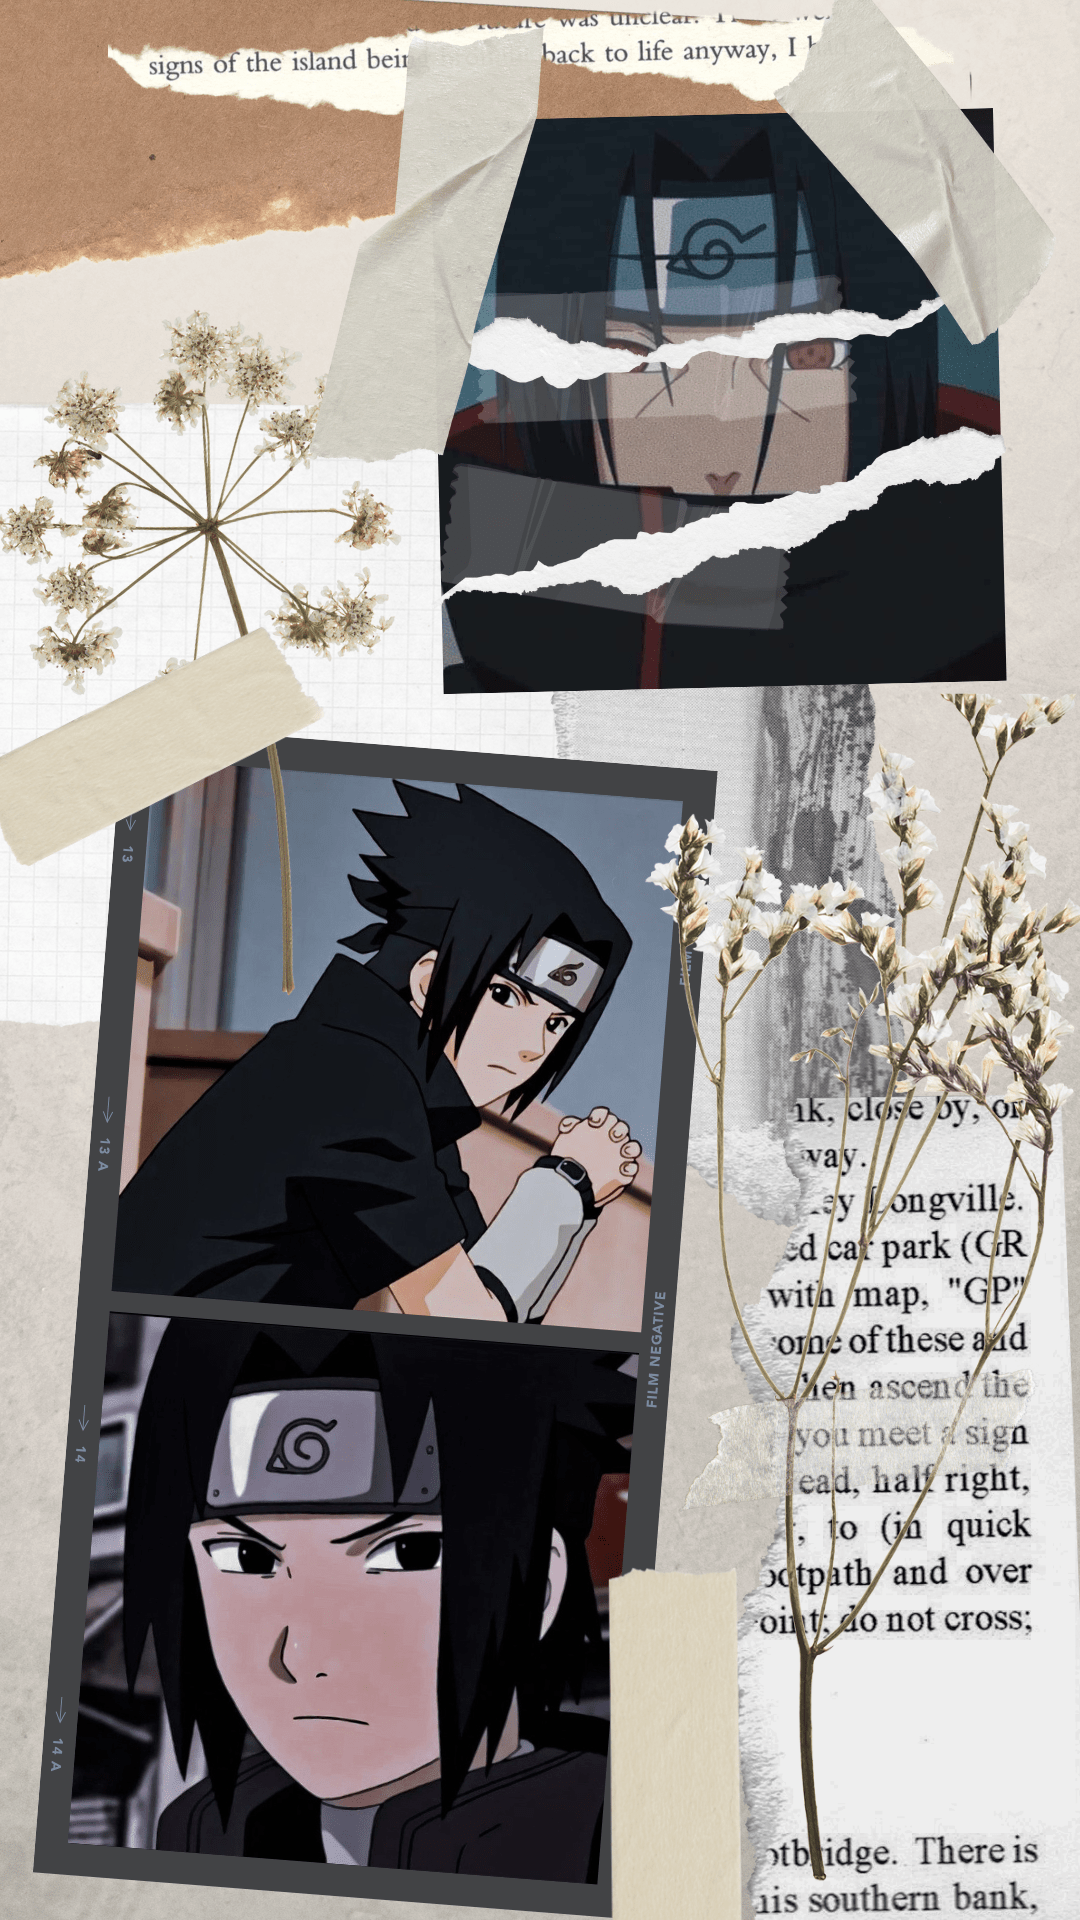 A collage of pictures with anime characters - Sasuke Uchiha